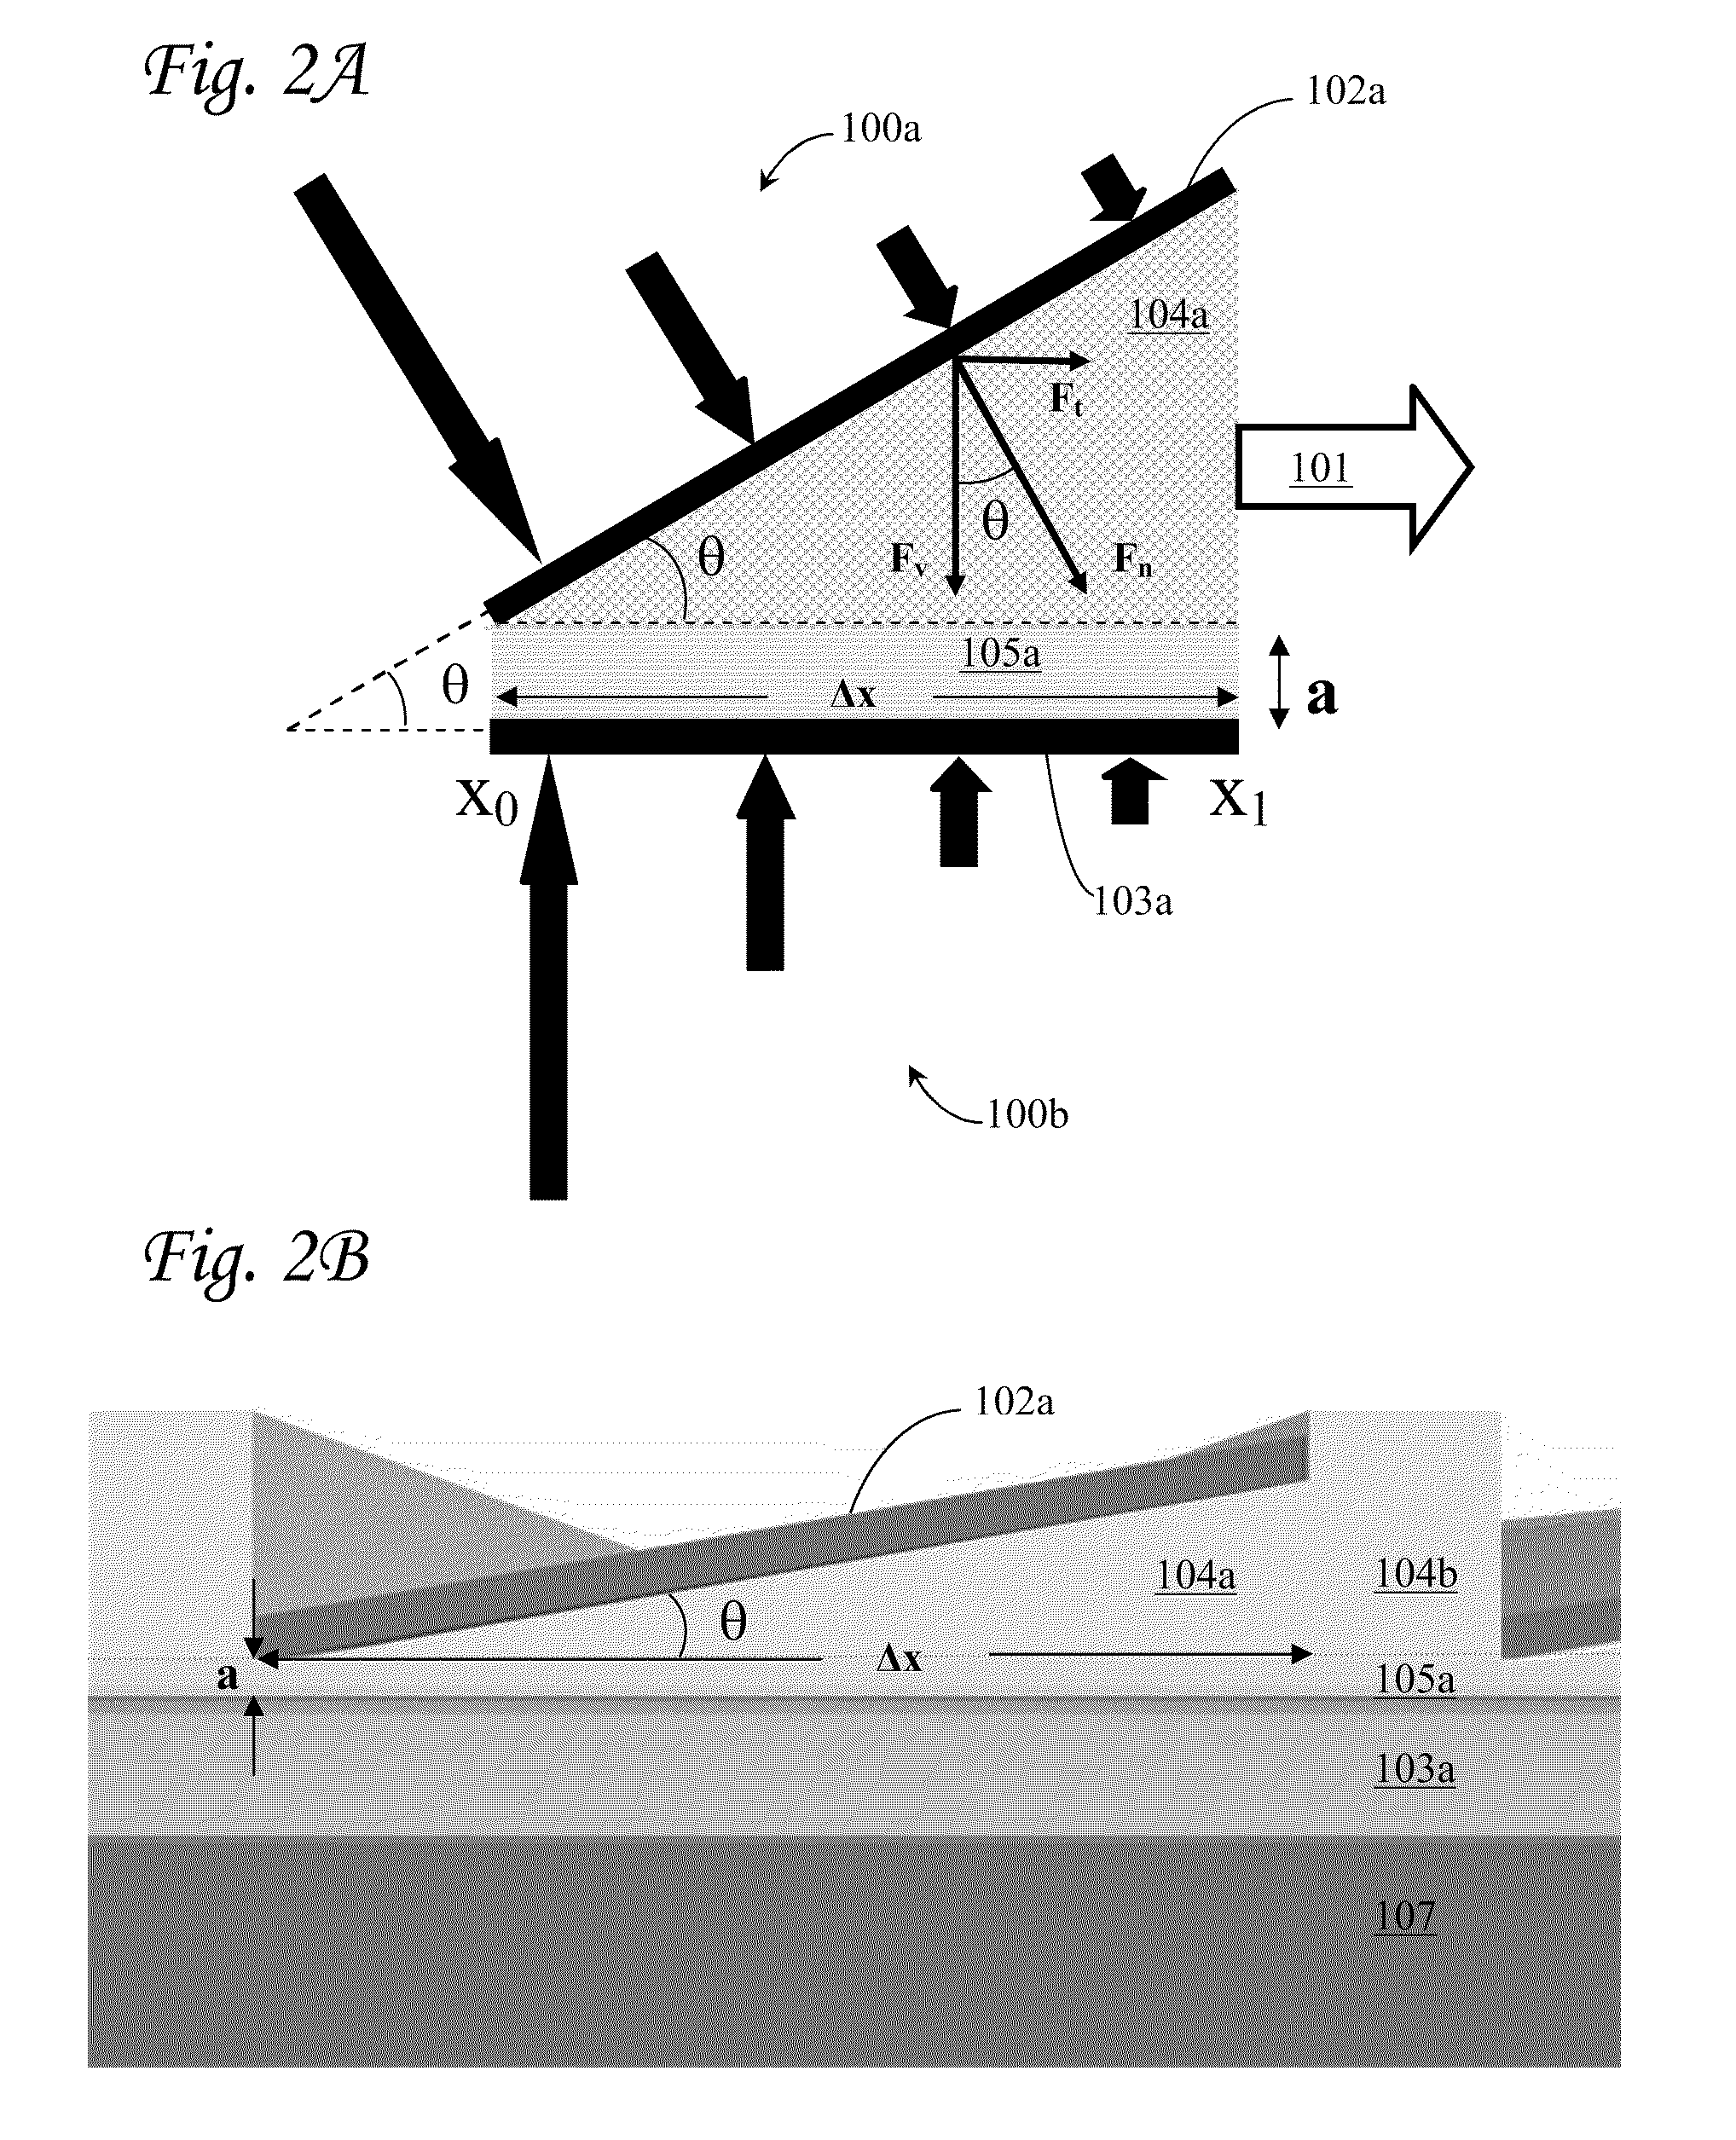 Switchable article and device to generate a lateral or transverse Casimir force for propulsion, guidance and maneuvering of a space vehicle